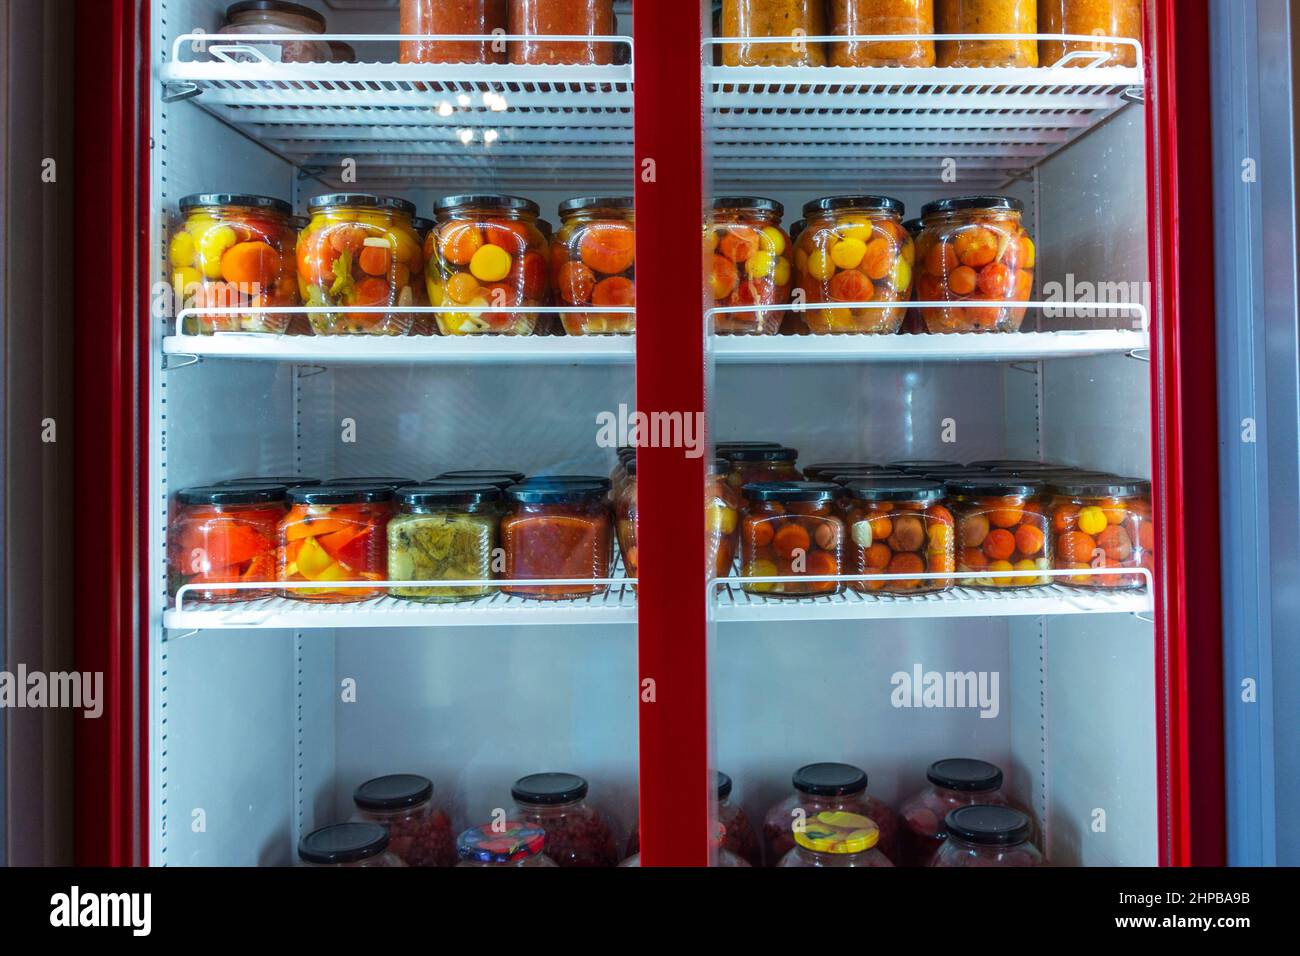 Is it safe to put canned food in the fridge?